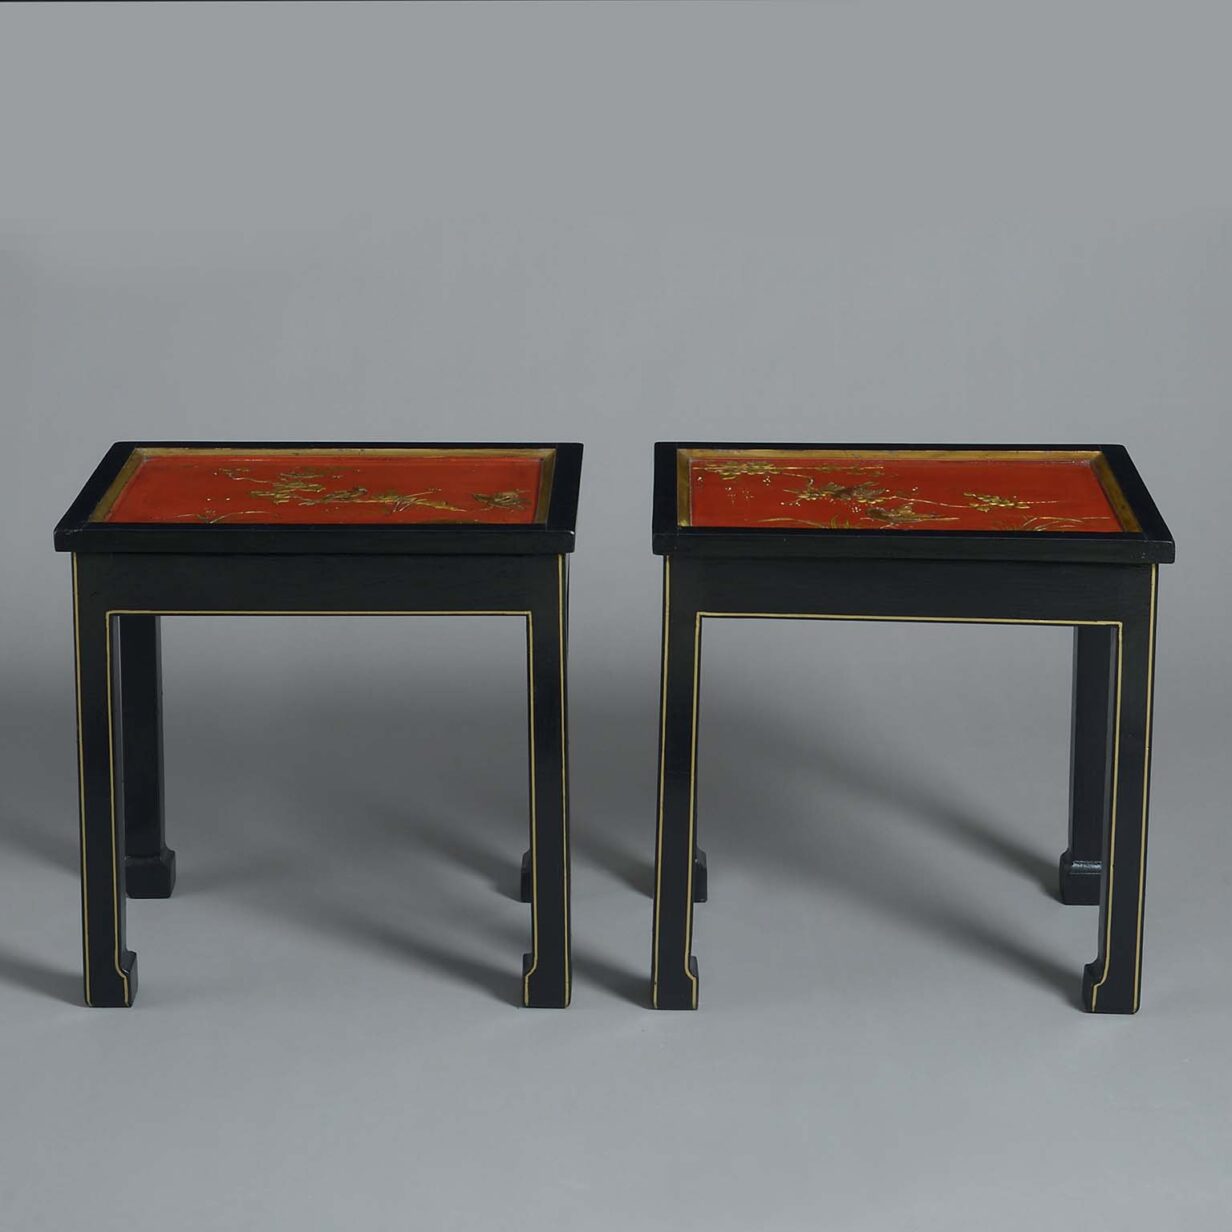 Pair of red lacquer low tables